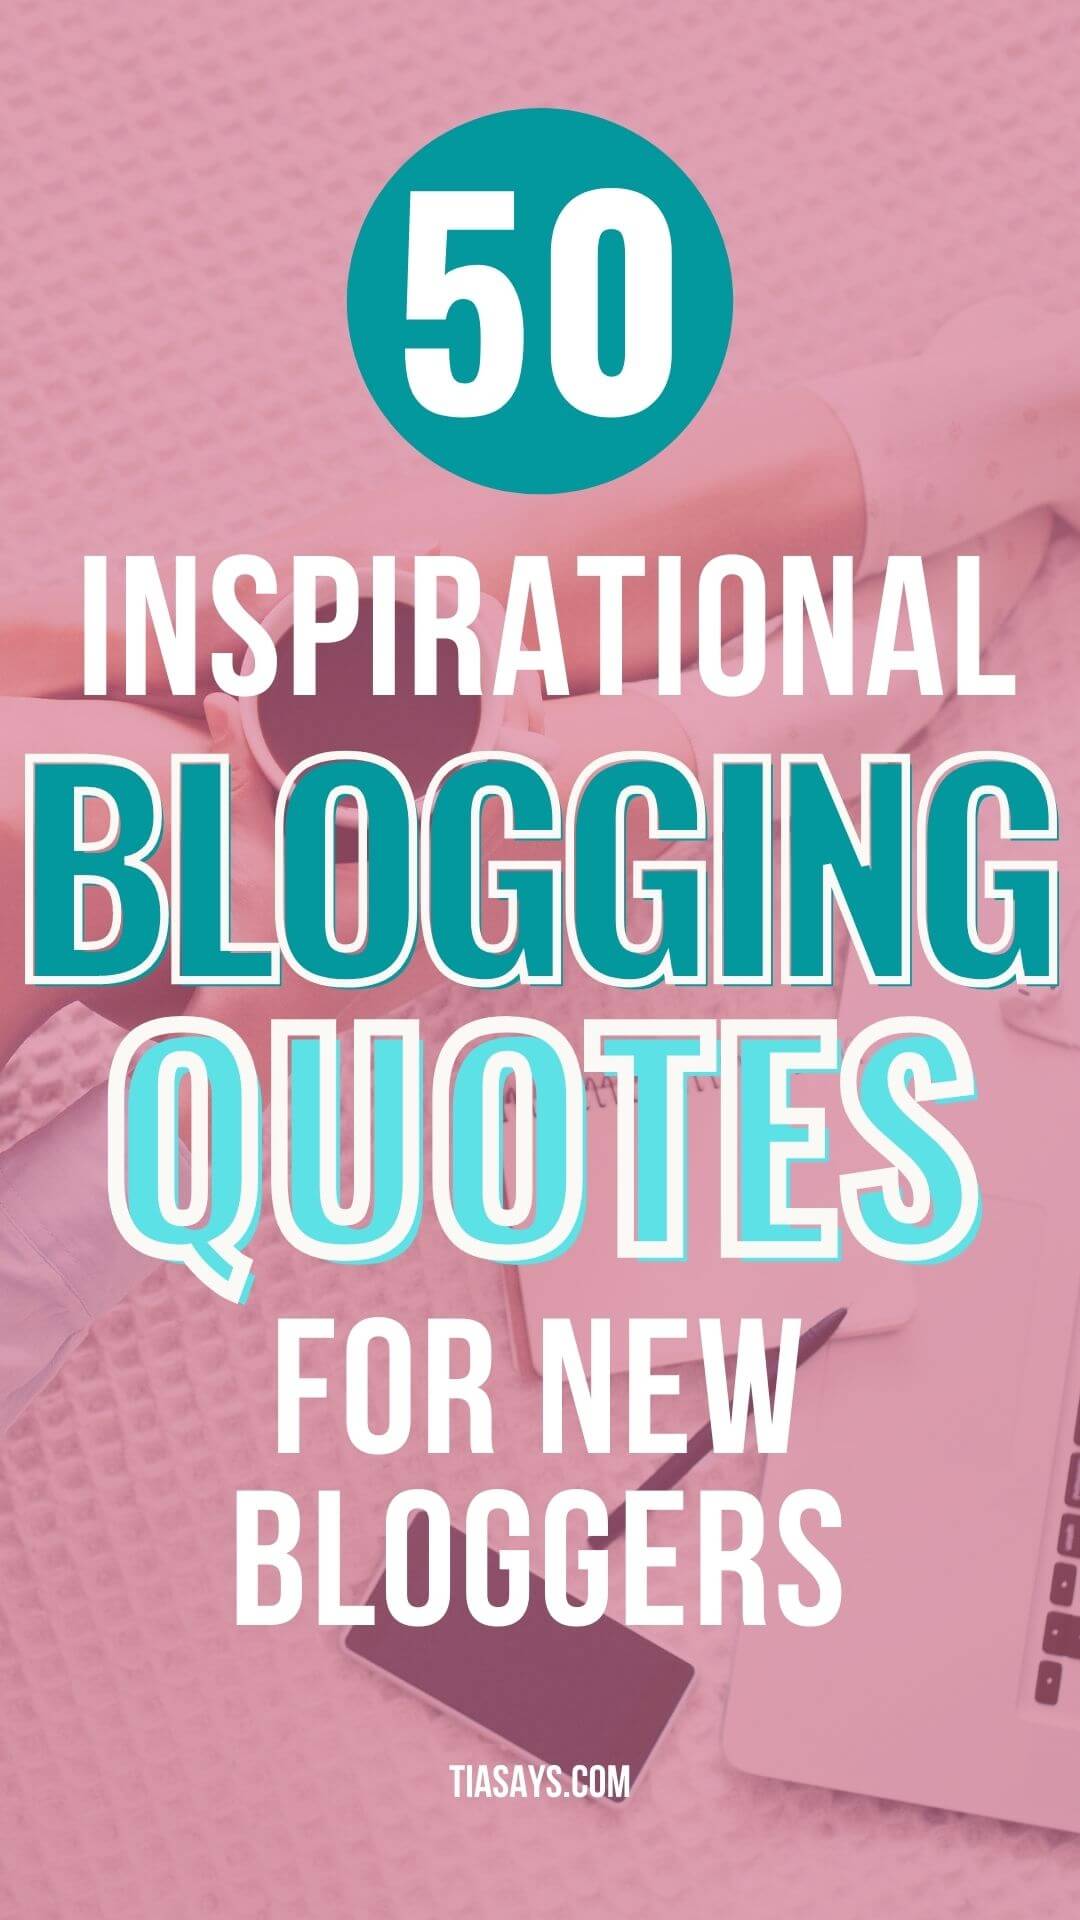 quotes on blogging for new bloggers